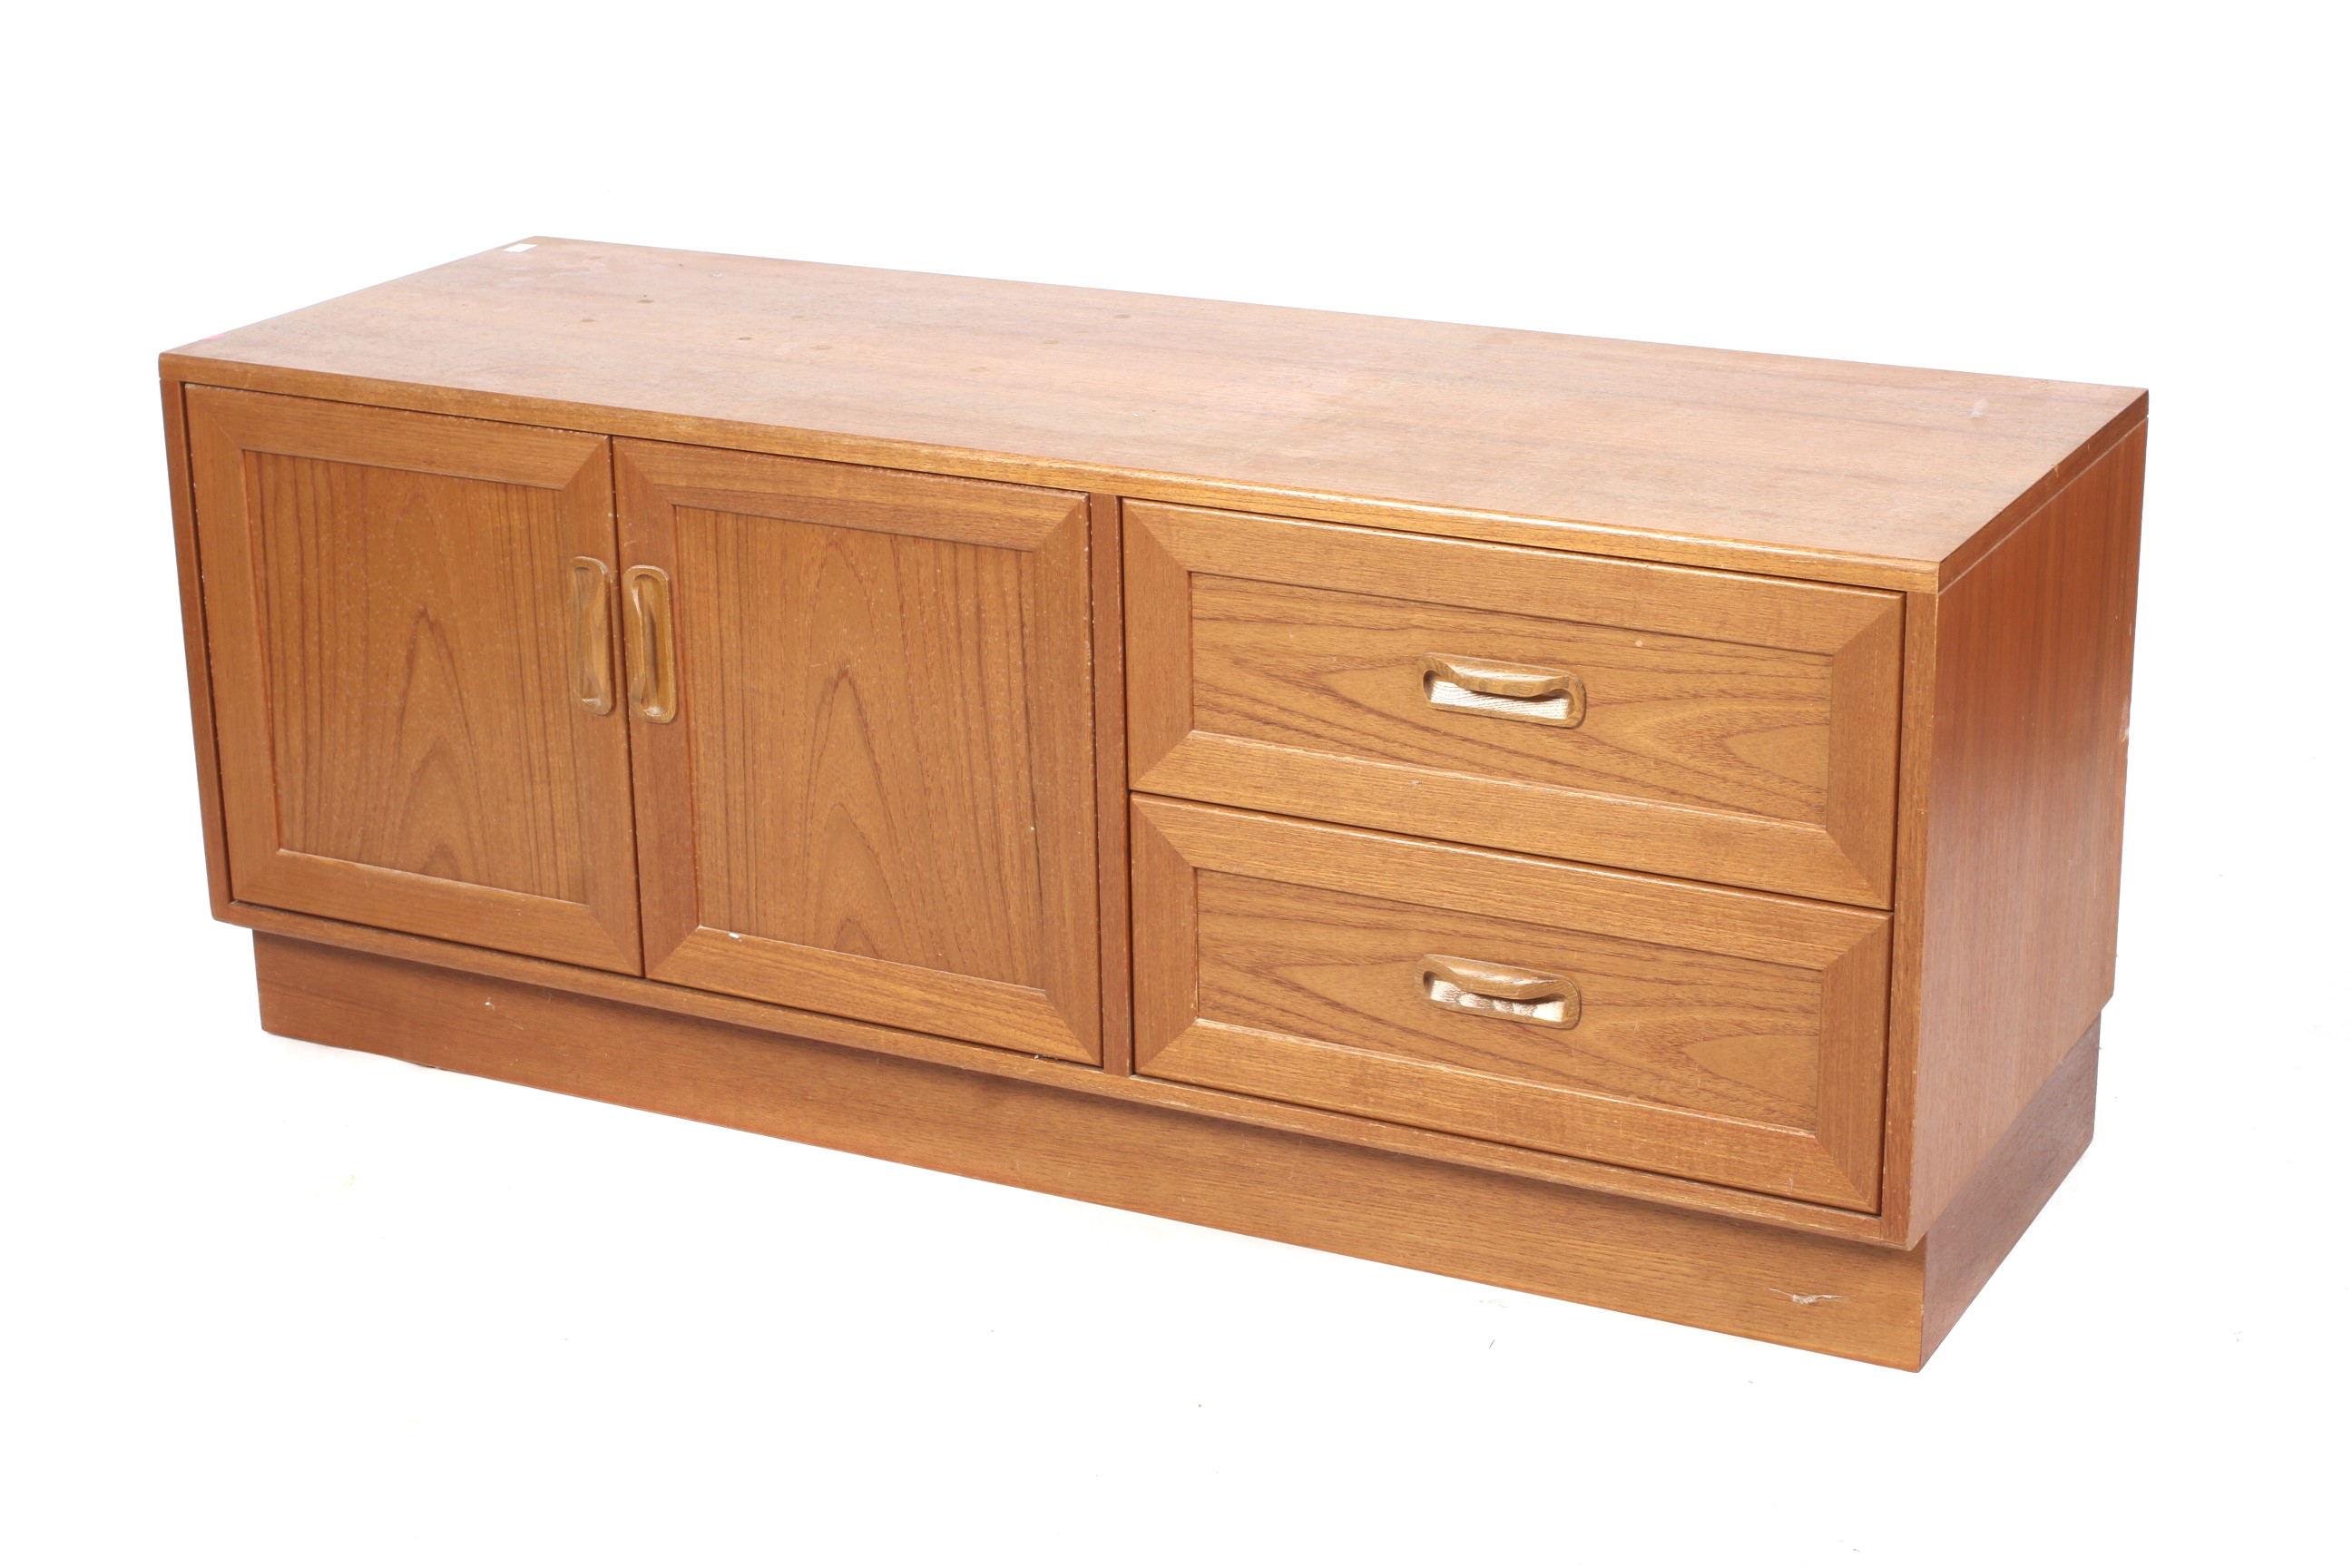 A low teak G Plan sideboard. With two drawers and double doors, with gold on red G Plan label.